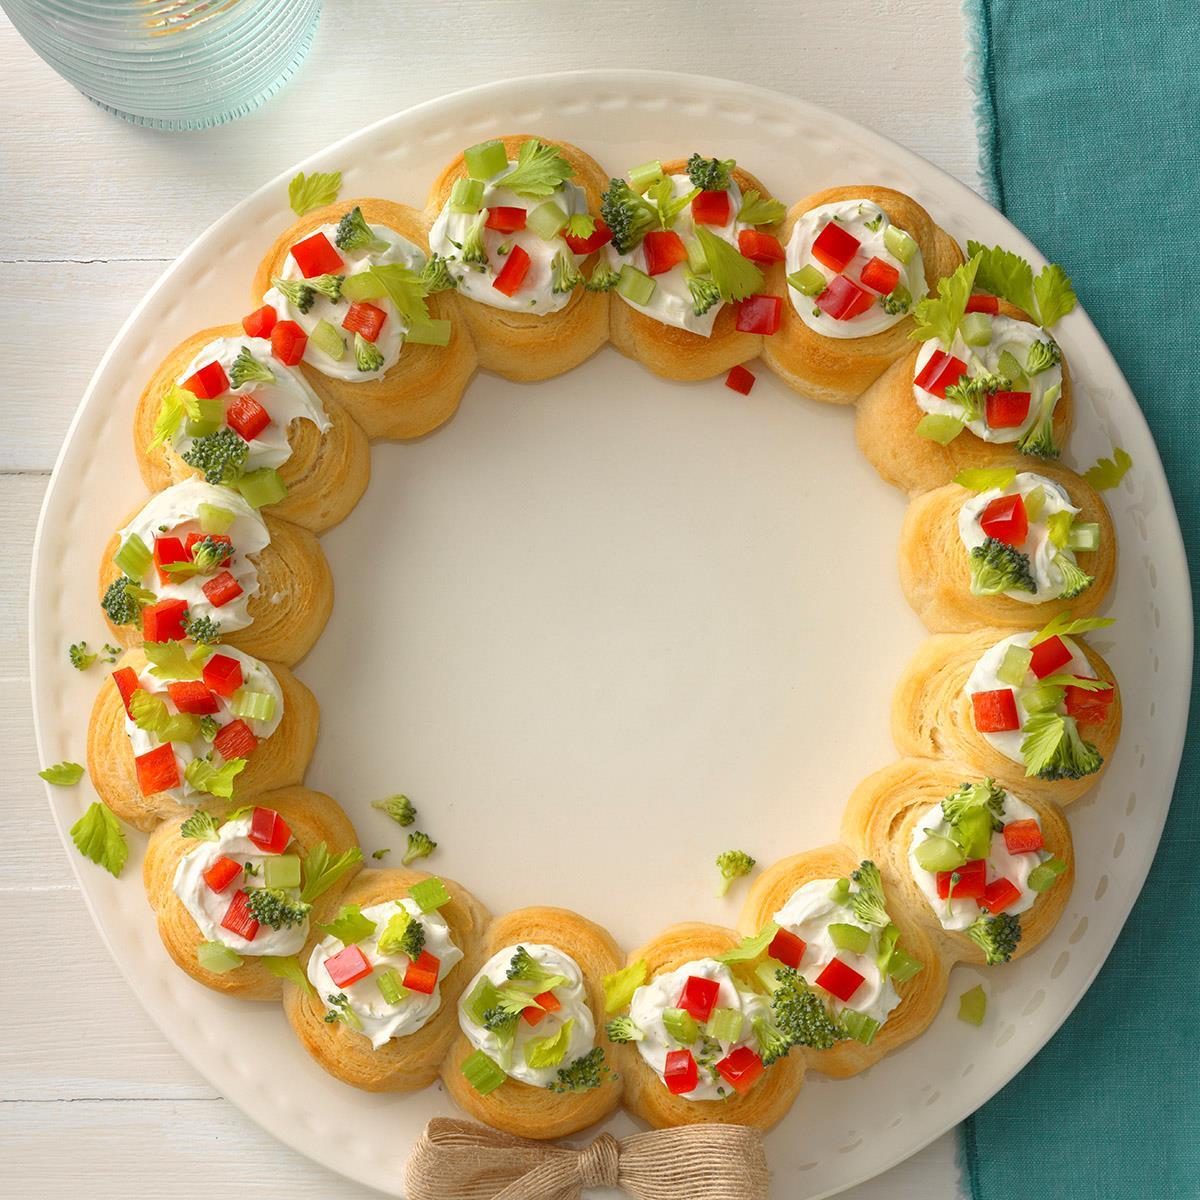 Cold Christmas Appetizers Ideas - 18 Easy Christmas Appetizer Recipes ...